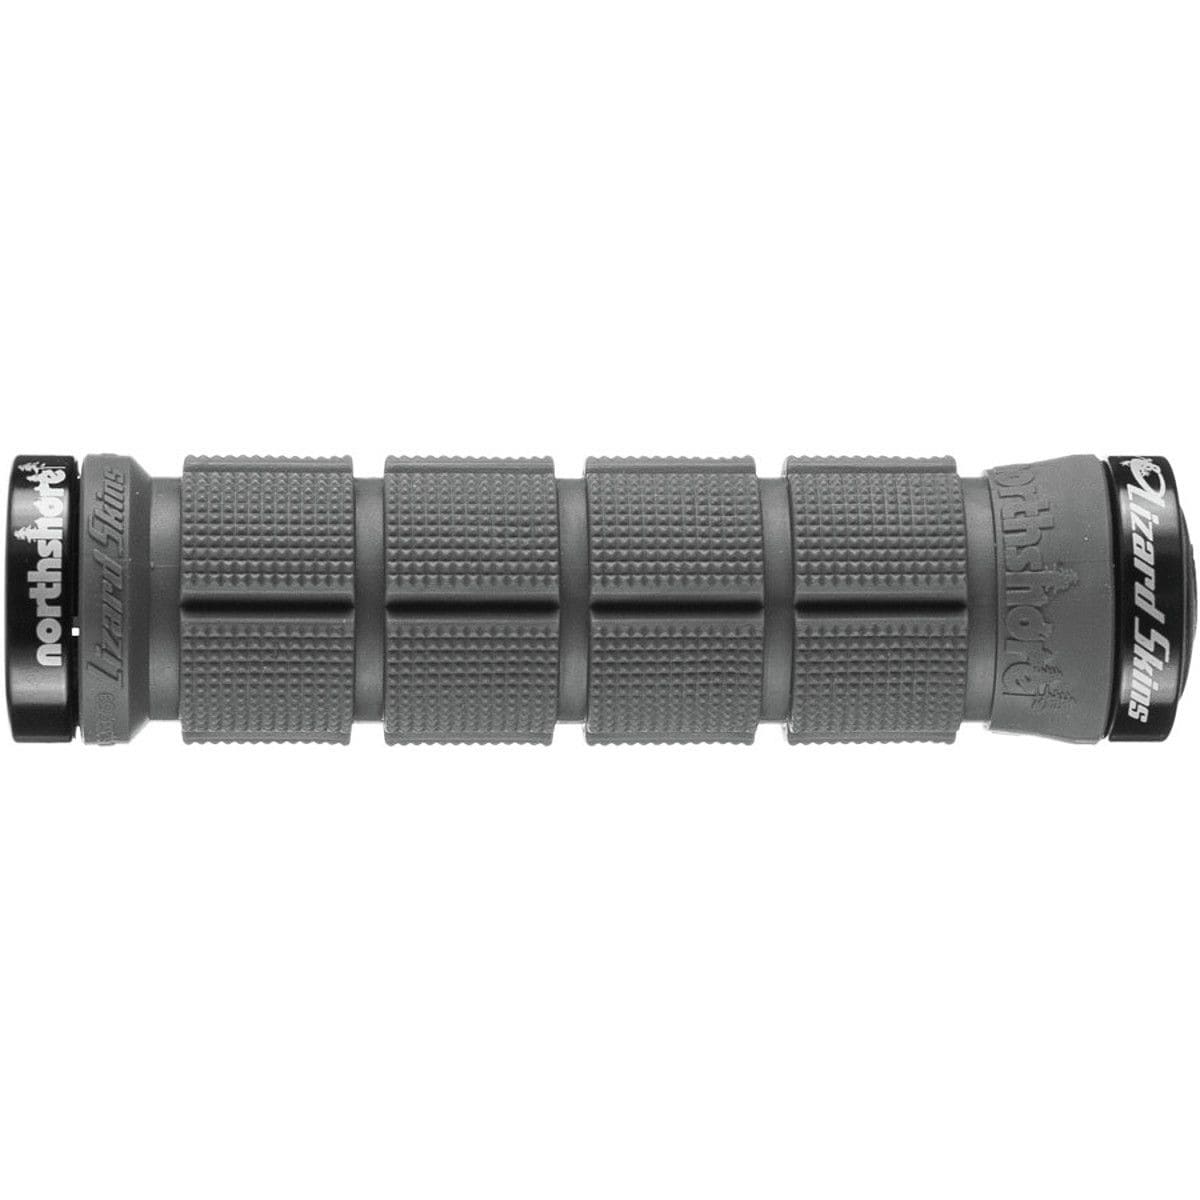 Lizard Skins Northshore Lock-On Grip Graphite W/ Black Clamps, One Size